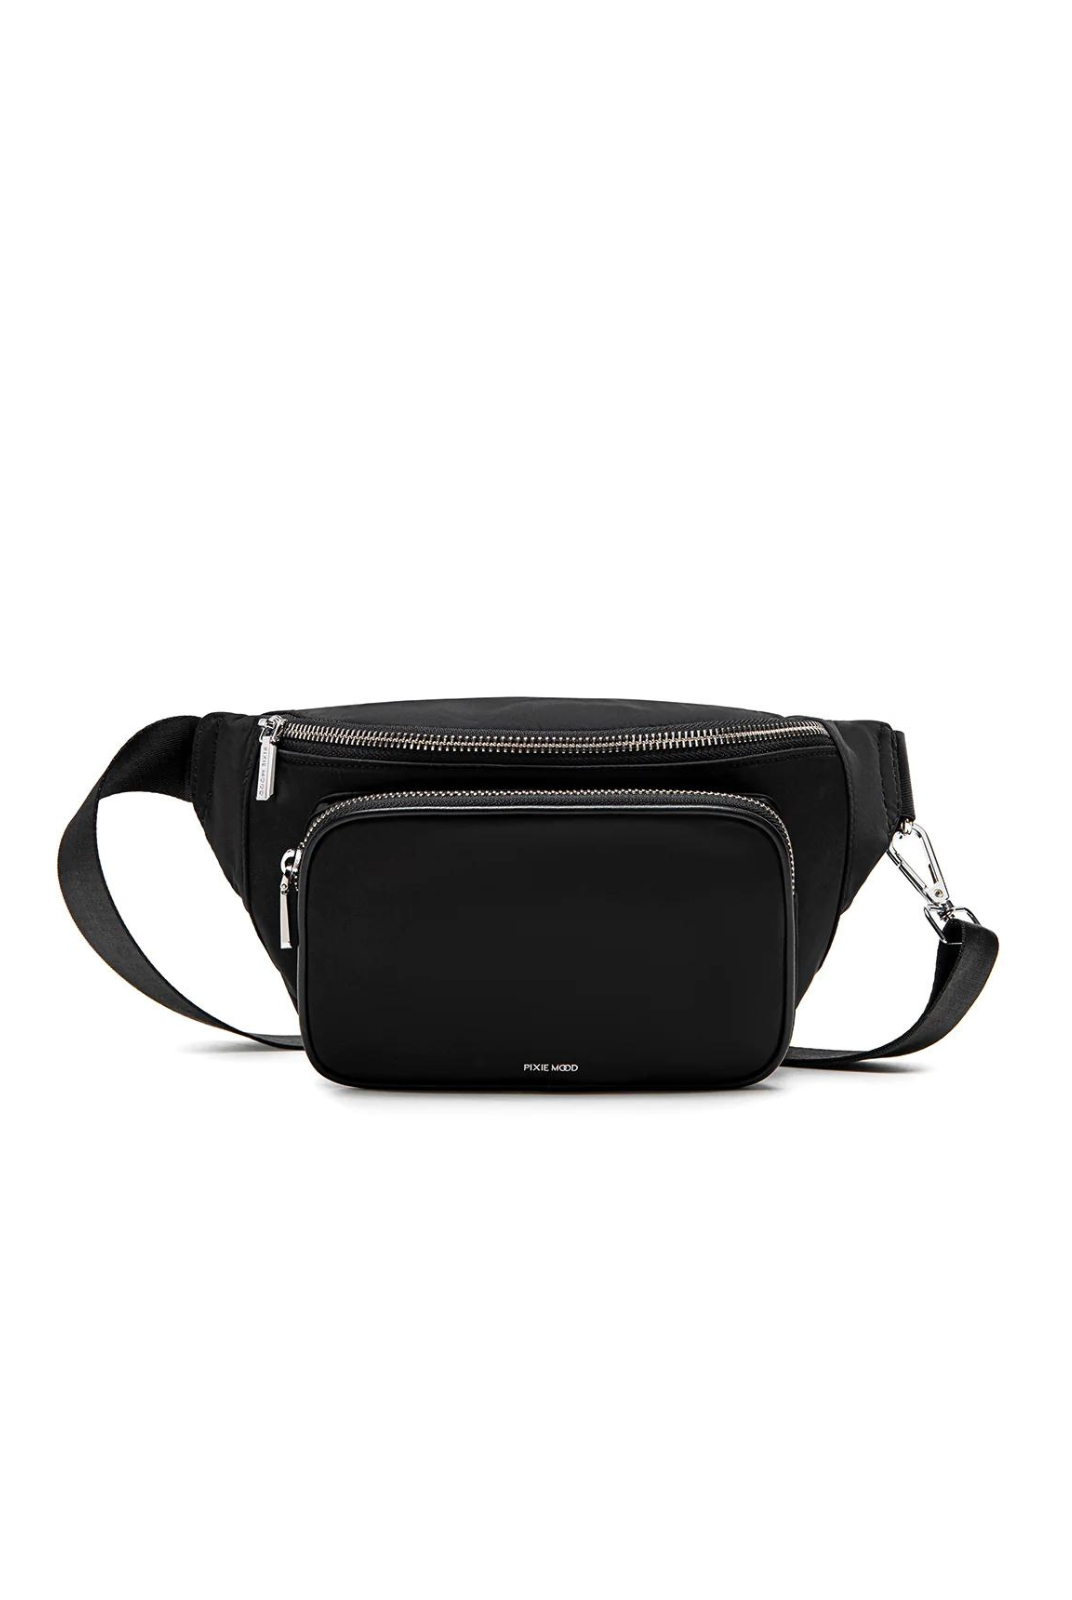 Pixie Mood Aaliyah Fanny Pack-Black Nylon. <p><span>The Aaliyah Fanny Pack is the perfect companion for all your adventures! Its lightweight and sleek design makes it a great addition to any outfit - whether you're going for an athleisure, casual look or an edgy vibe. Plus, the exterior zip pocket allows for easy access to your essentials.